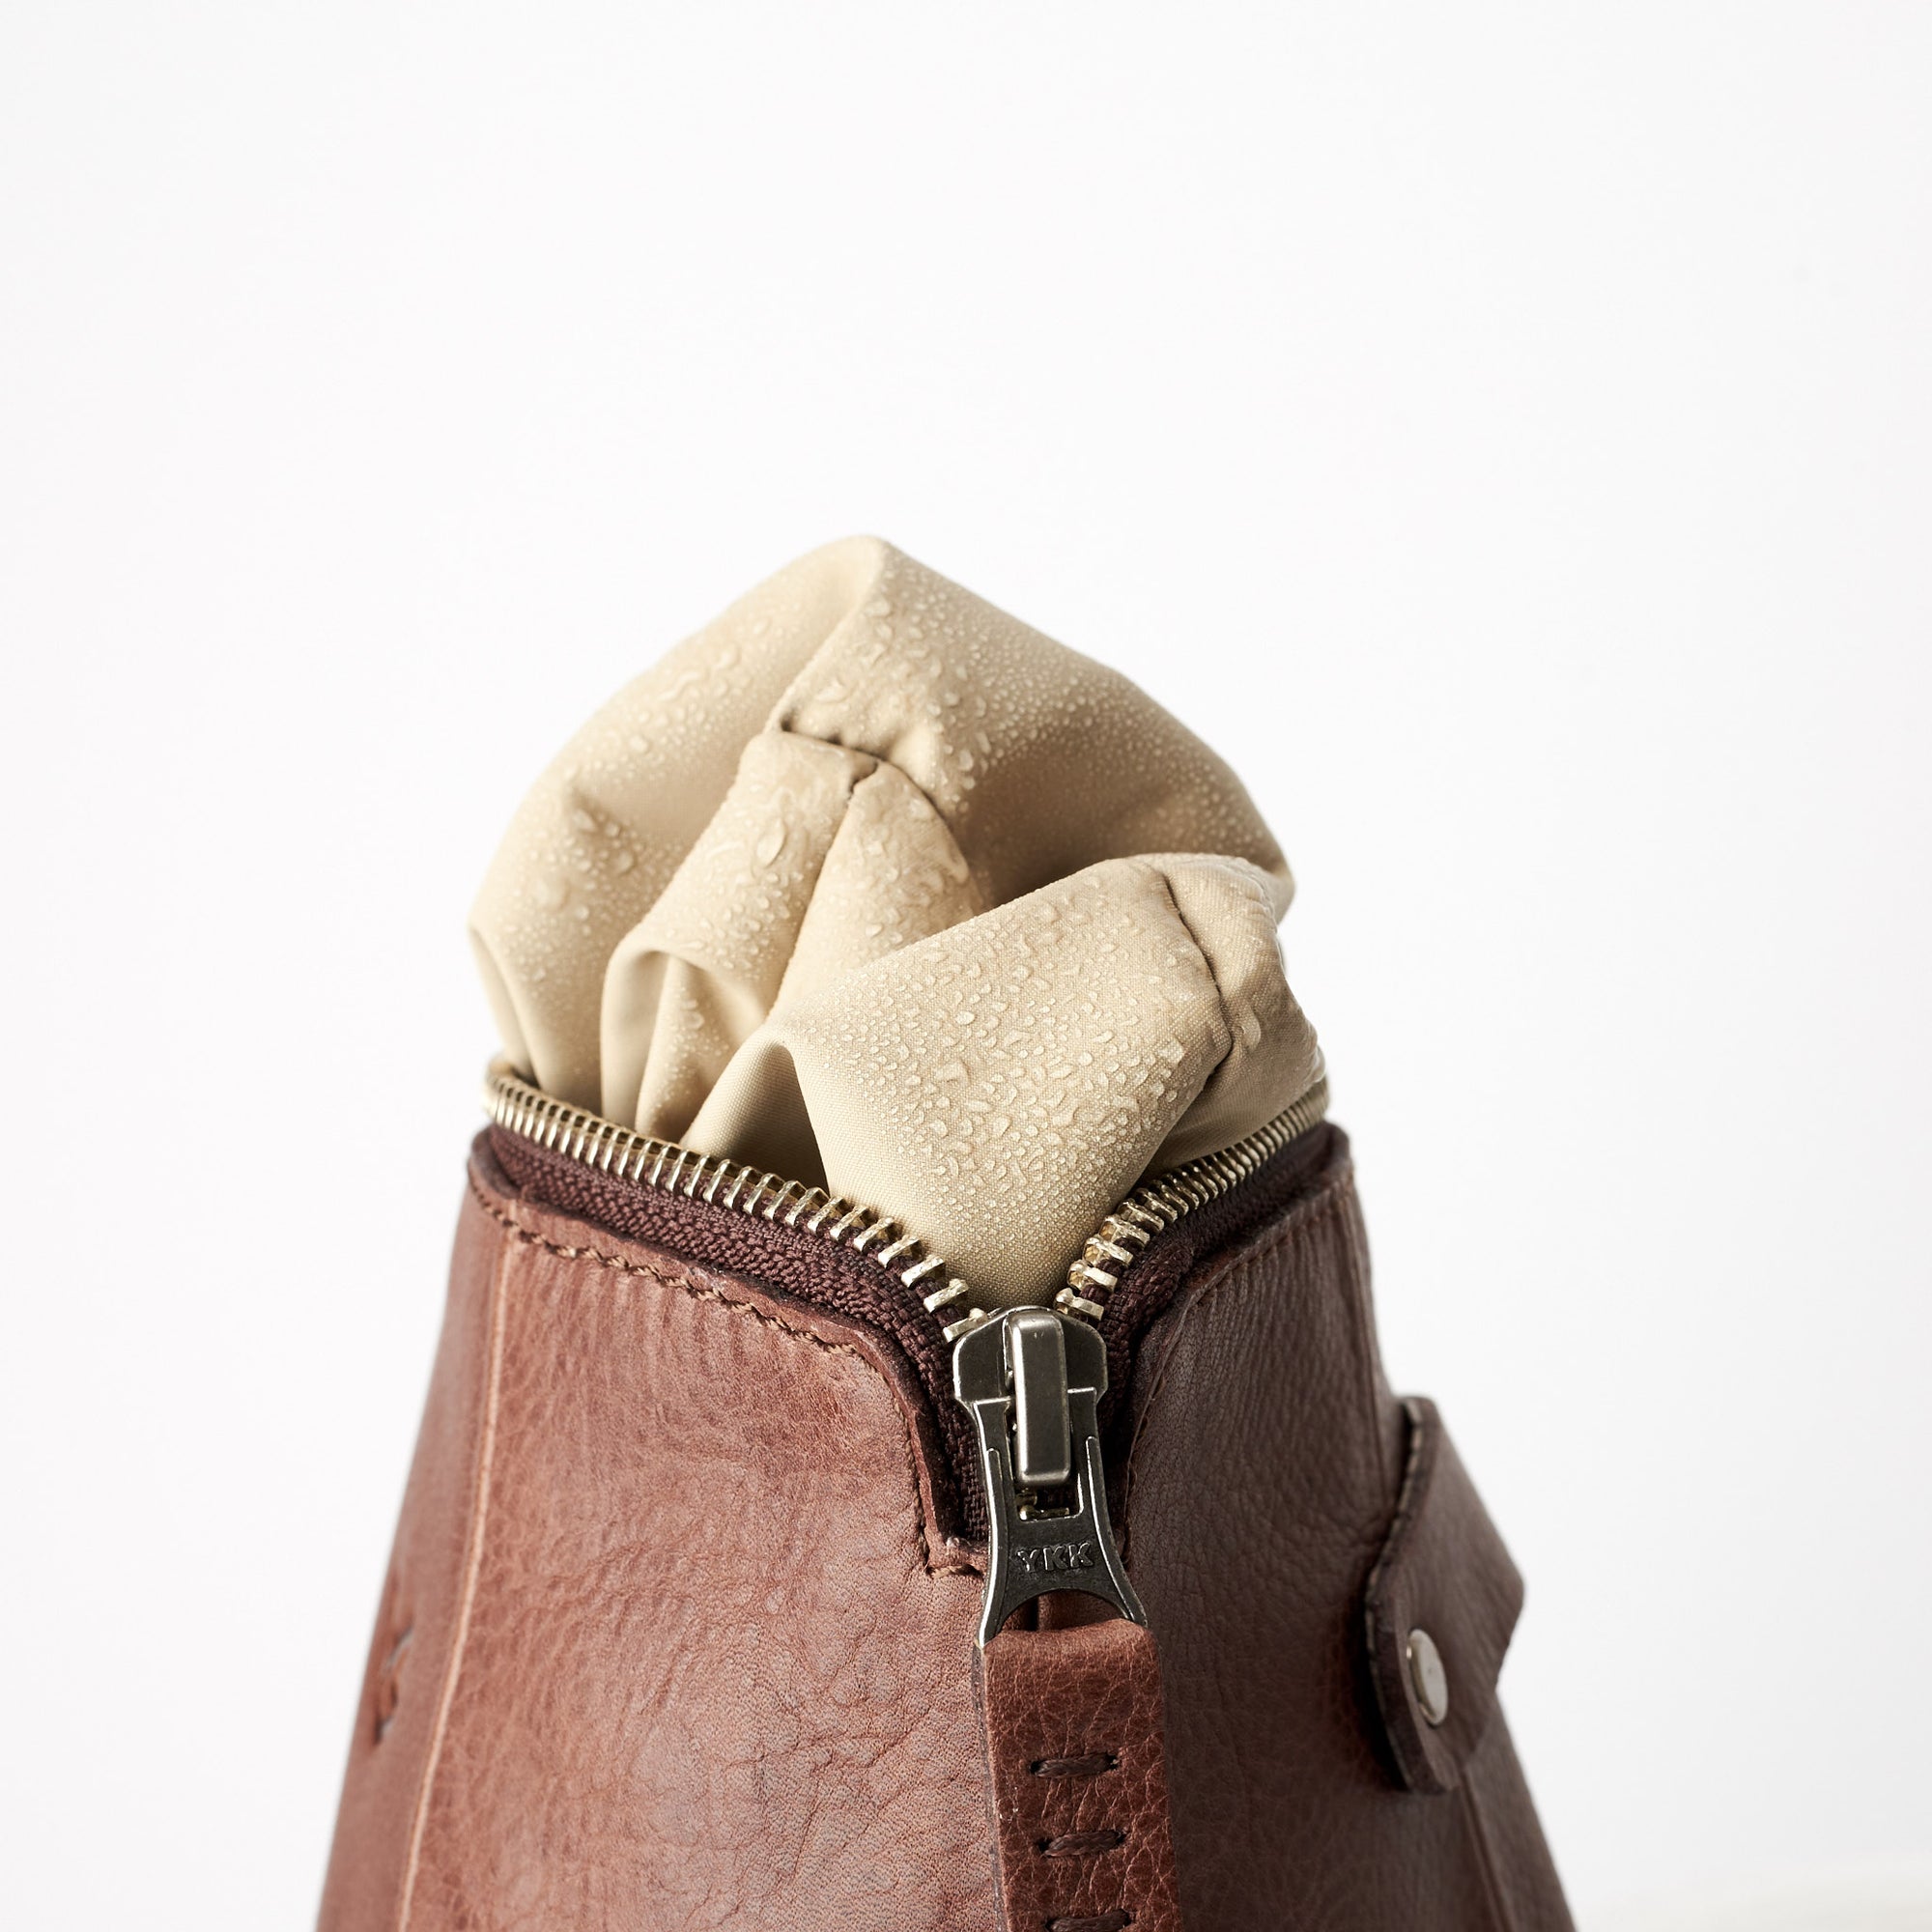 Detail, waterproof interior, hand stitched pull tabs. Brown leather boxer toiletry bag. Mens leather dopp kit travel bag